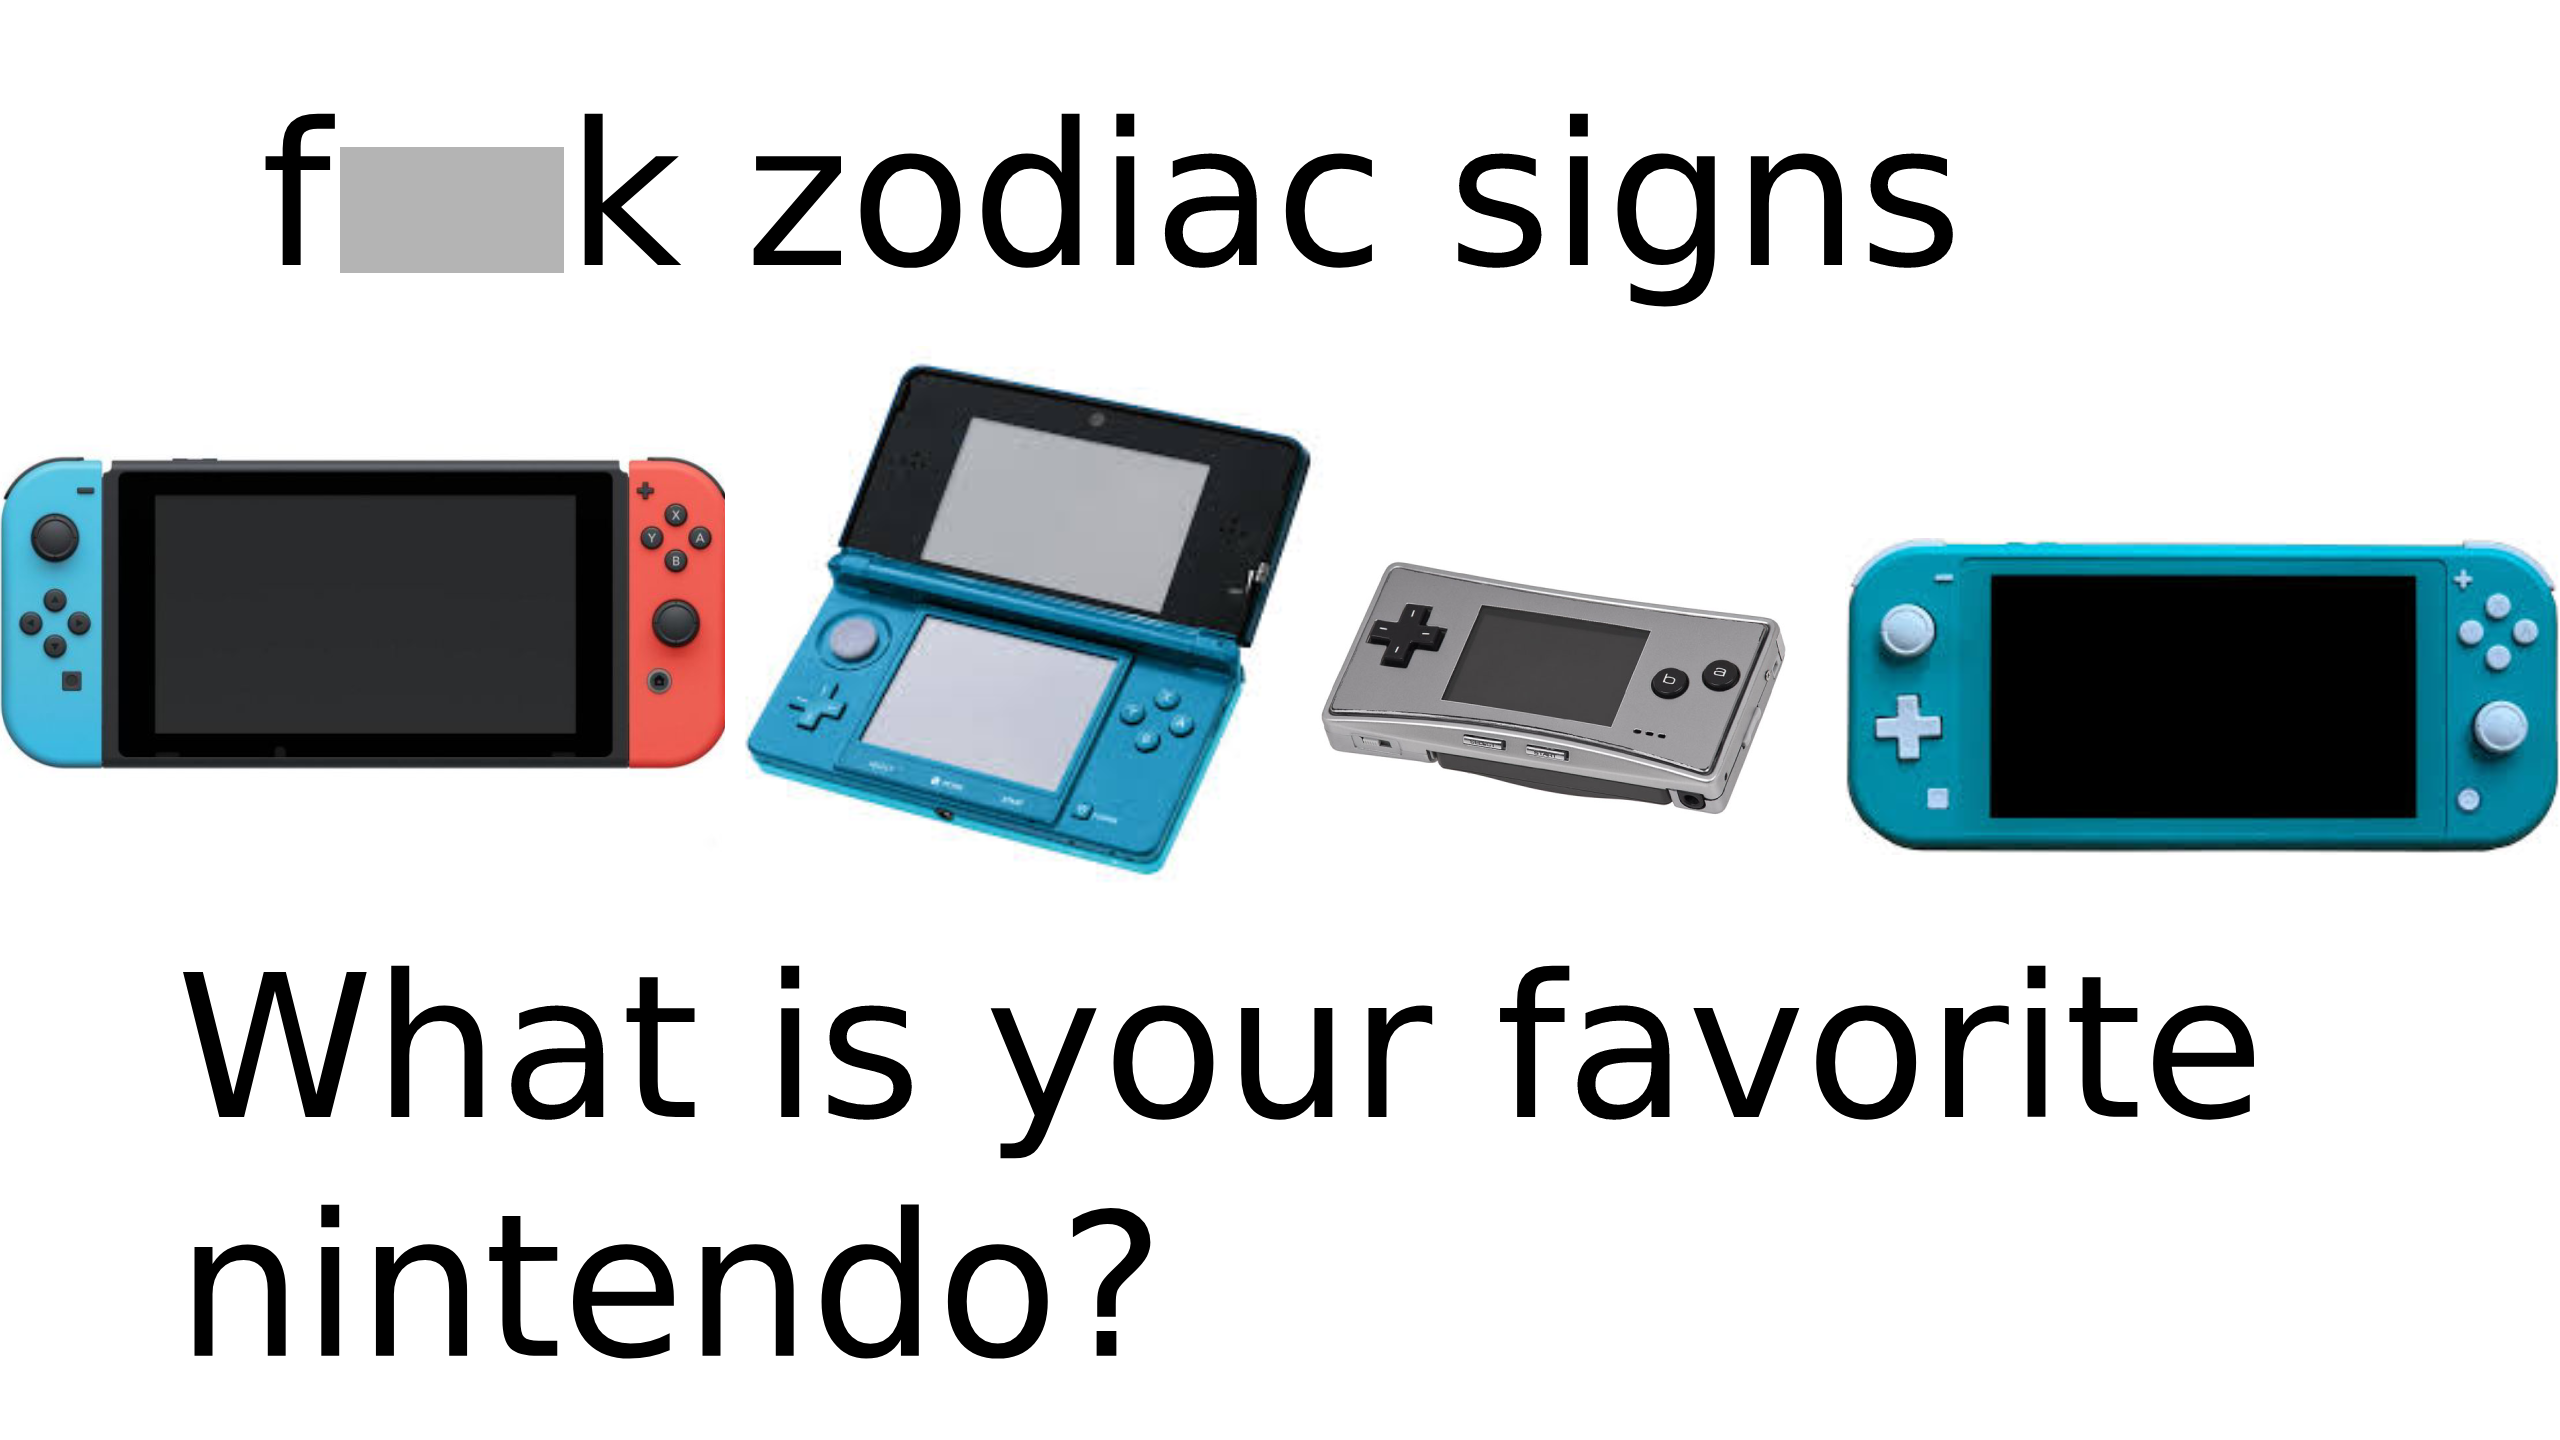 fresh memes - playstation portable accessory - fk zodiac signs What is your favorite nintendo?